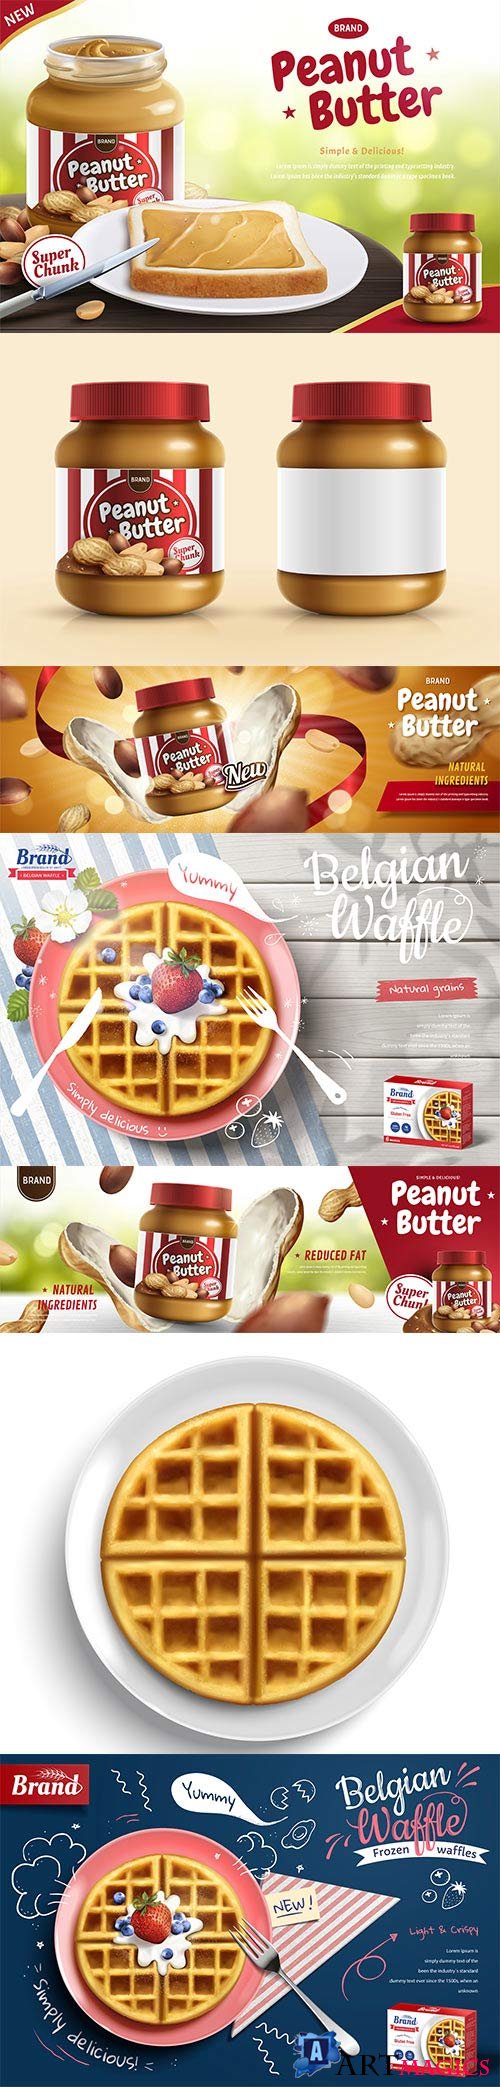 Peanut butter spread ads and waffle ads with fruit in 3d vector illustration